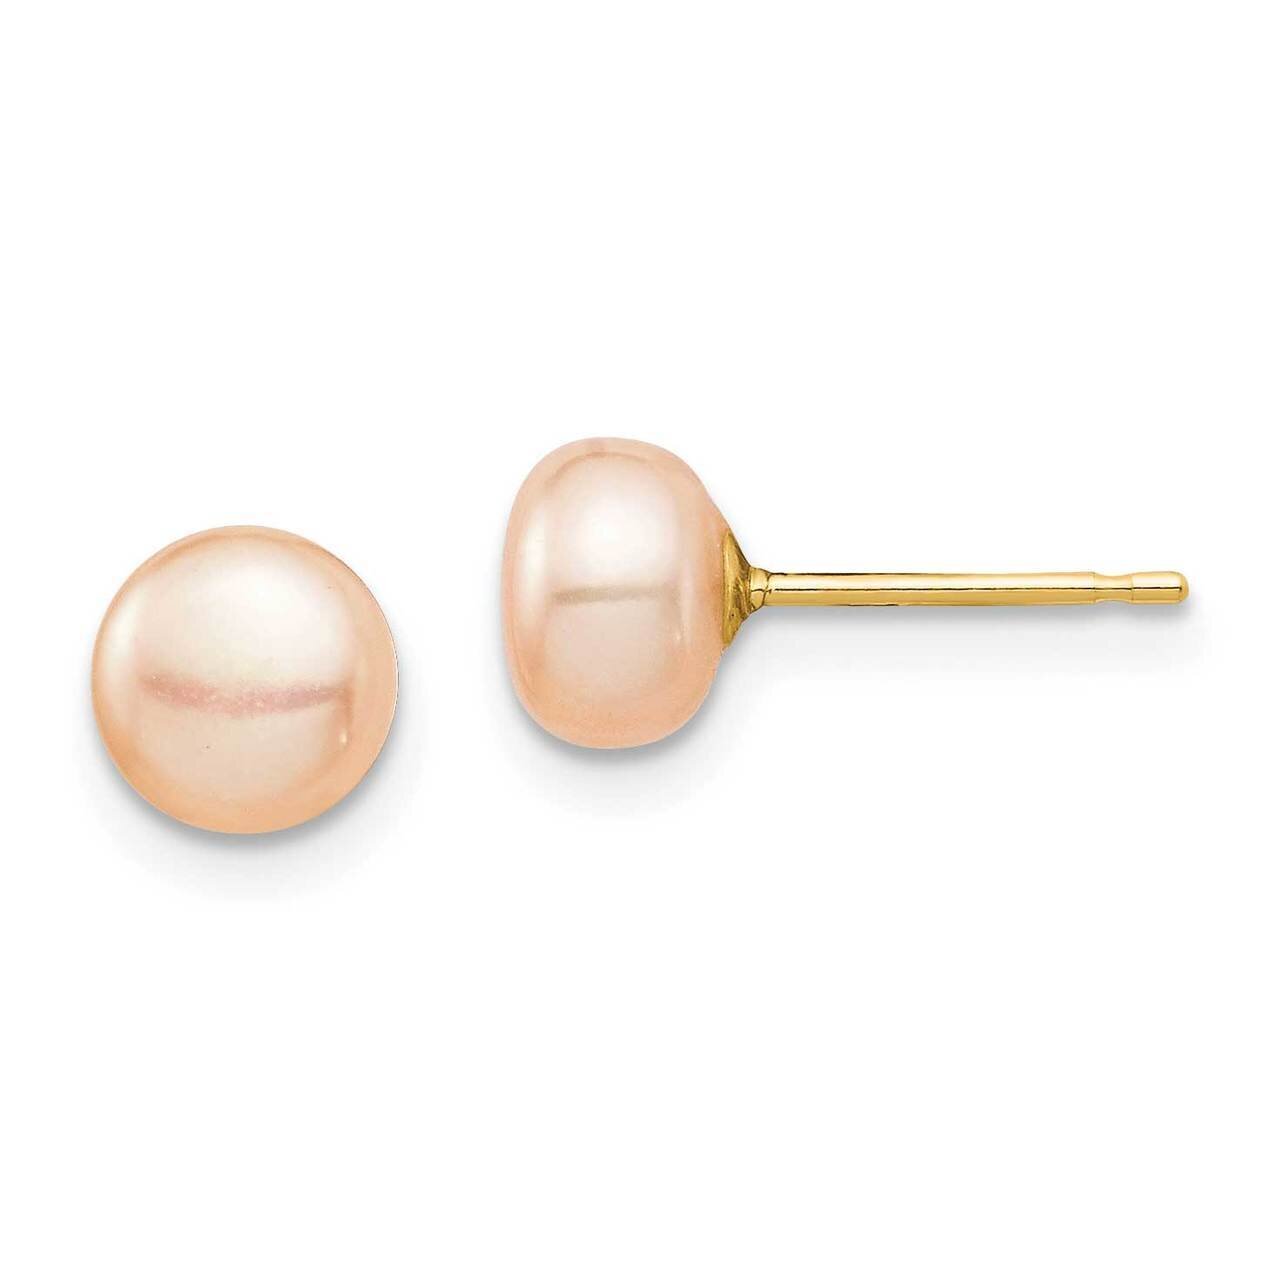 6-7mm Pink Button Freshwater Cultured Pearl Stud Post Earrings 14k Gold SE2939